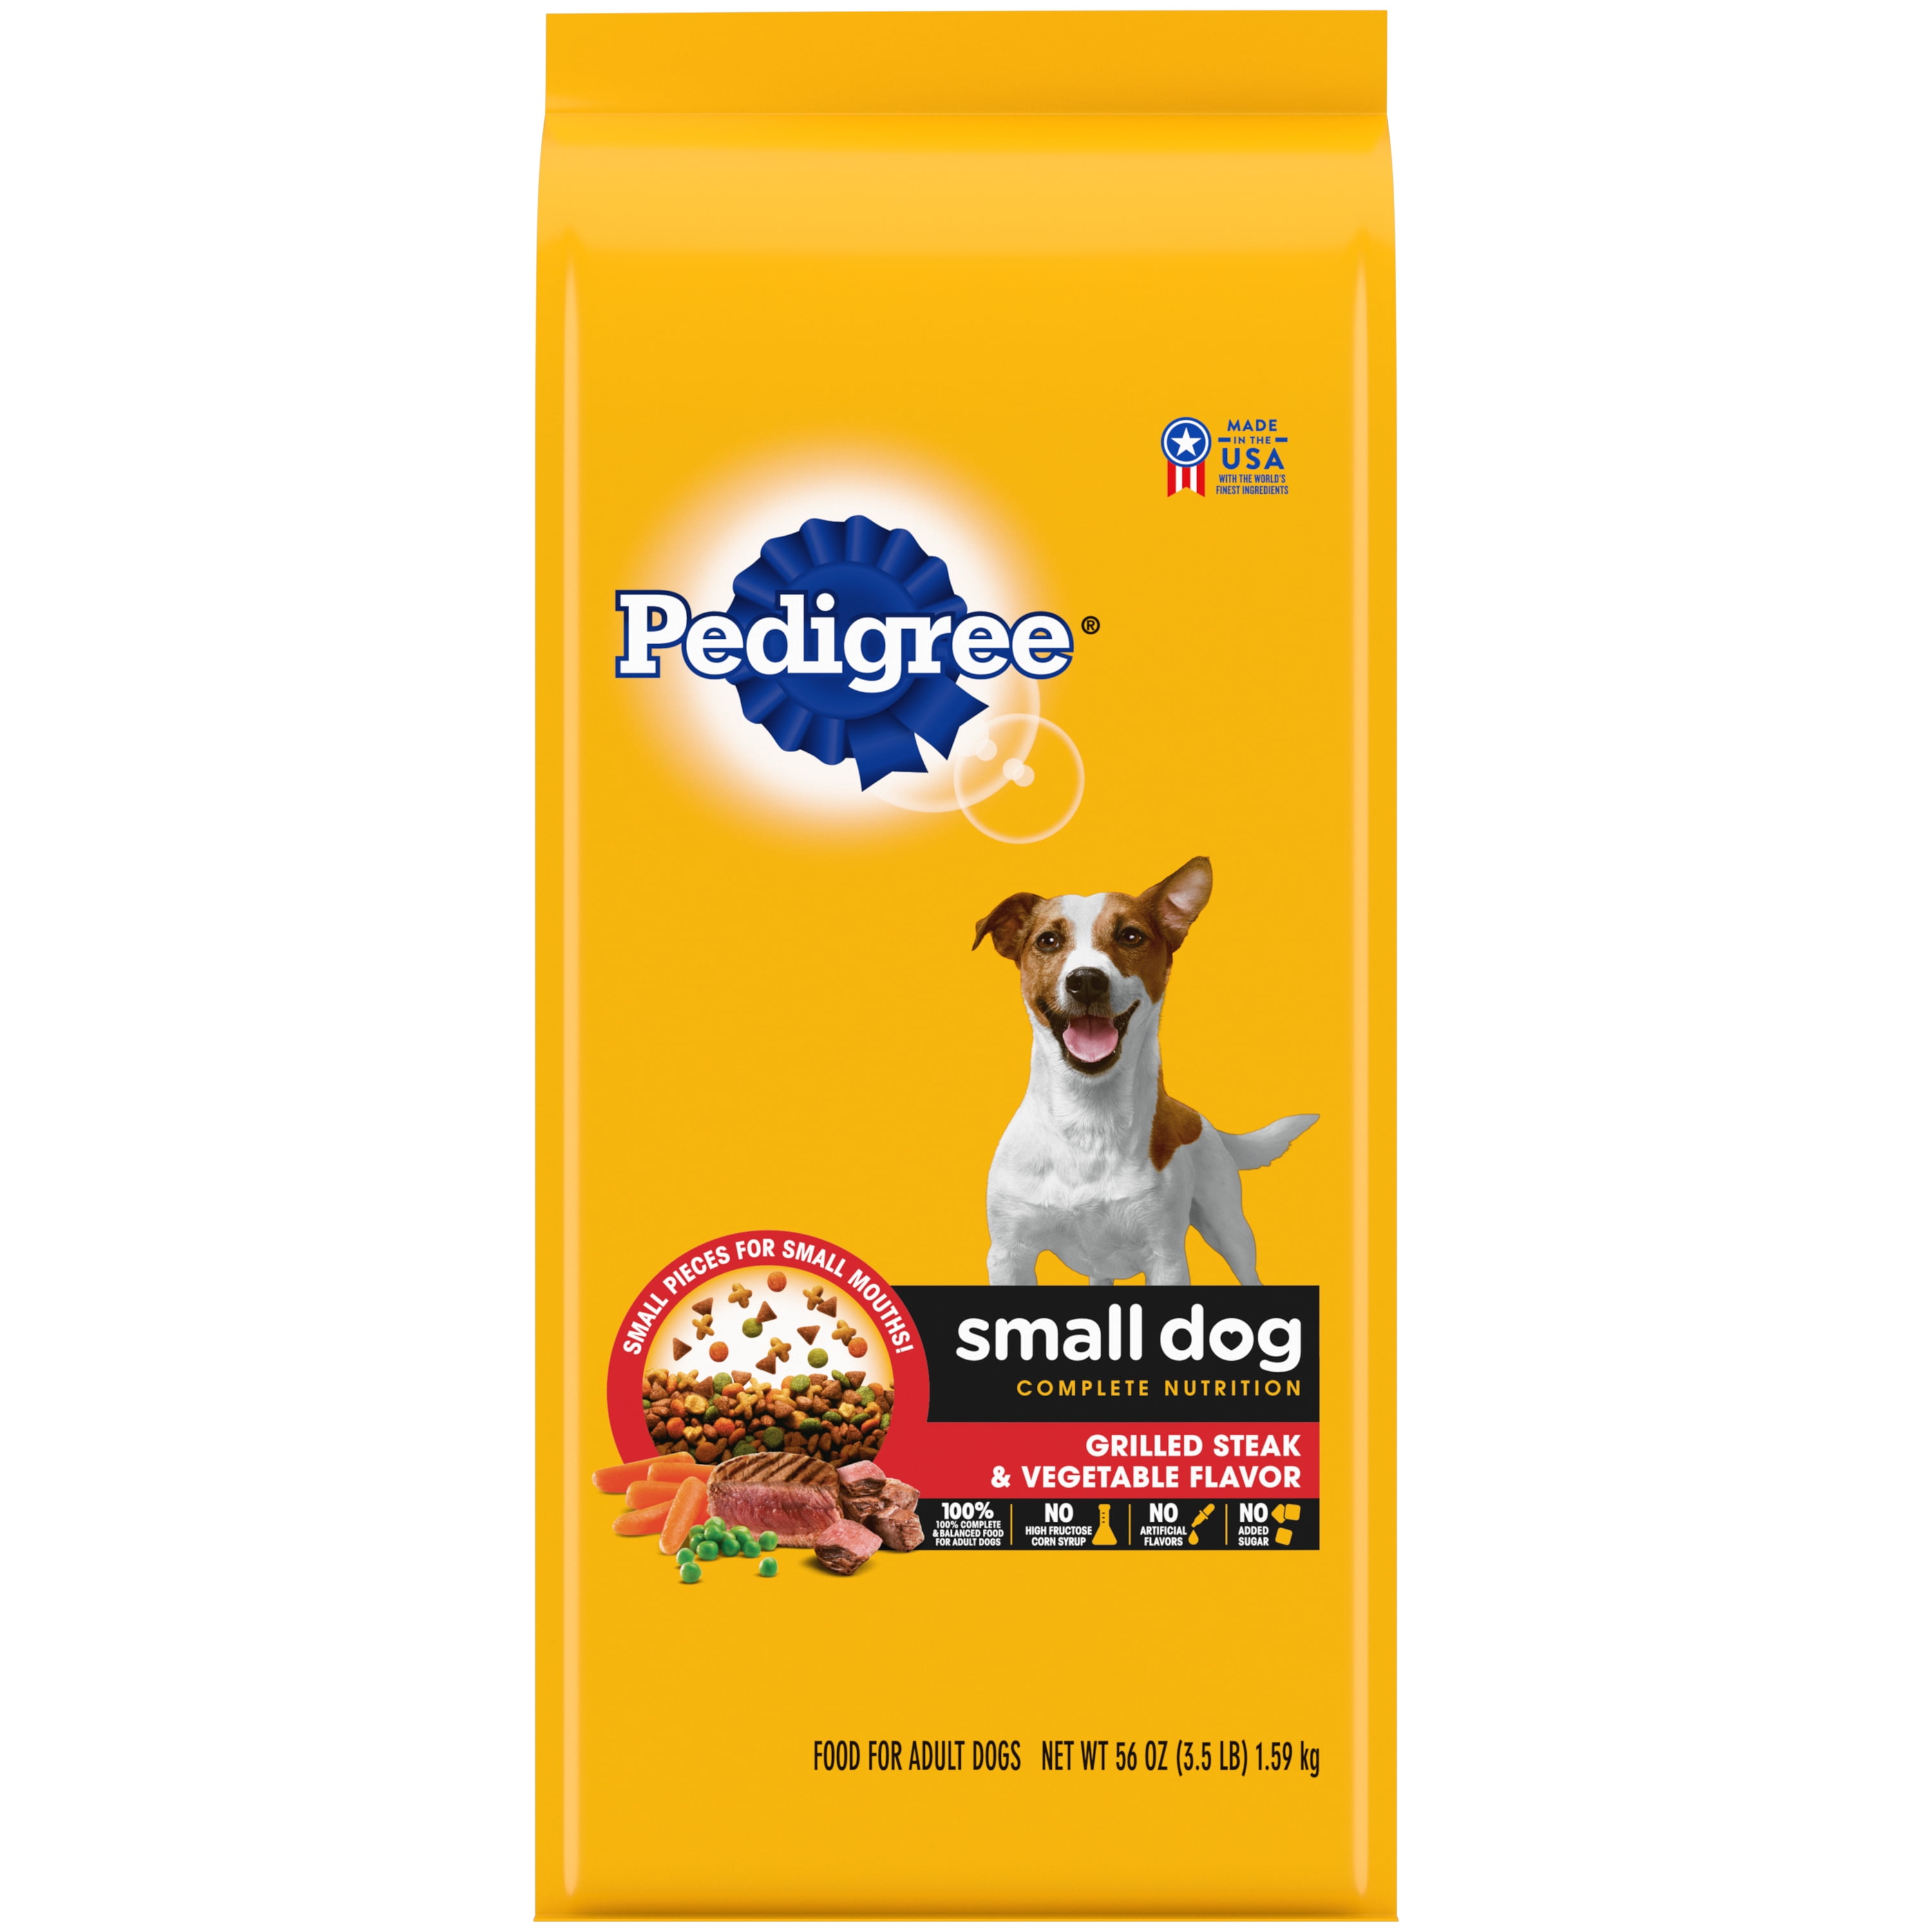 Pedigree Complete Nutrition Chicken, Rice & Vegetable Dry Dog Food for Small Dog, 3.5 lb. Bag